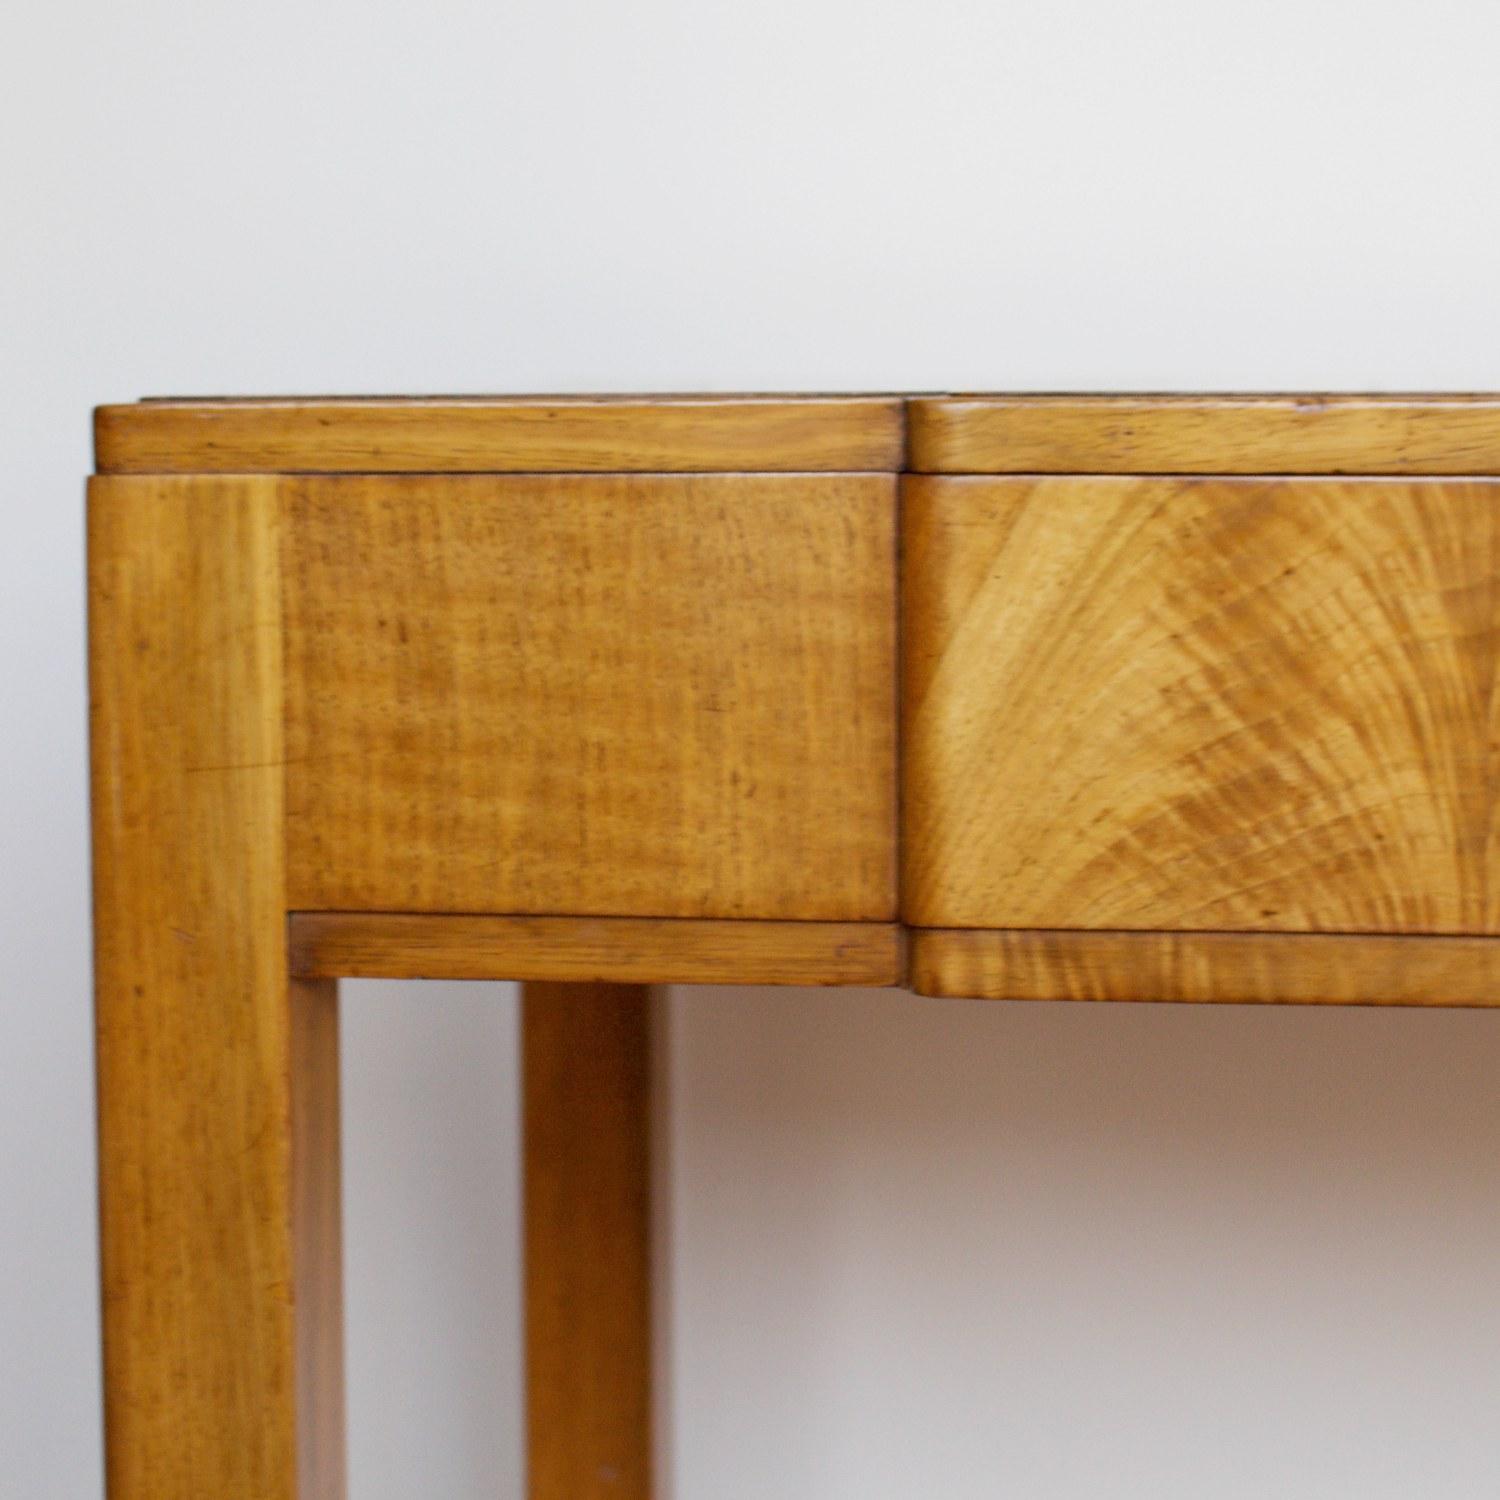 heal's console table